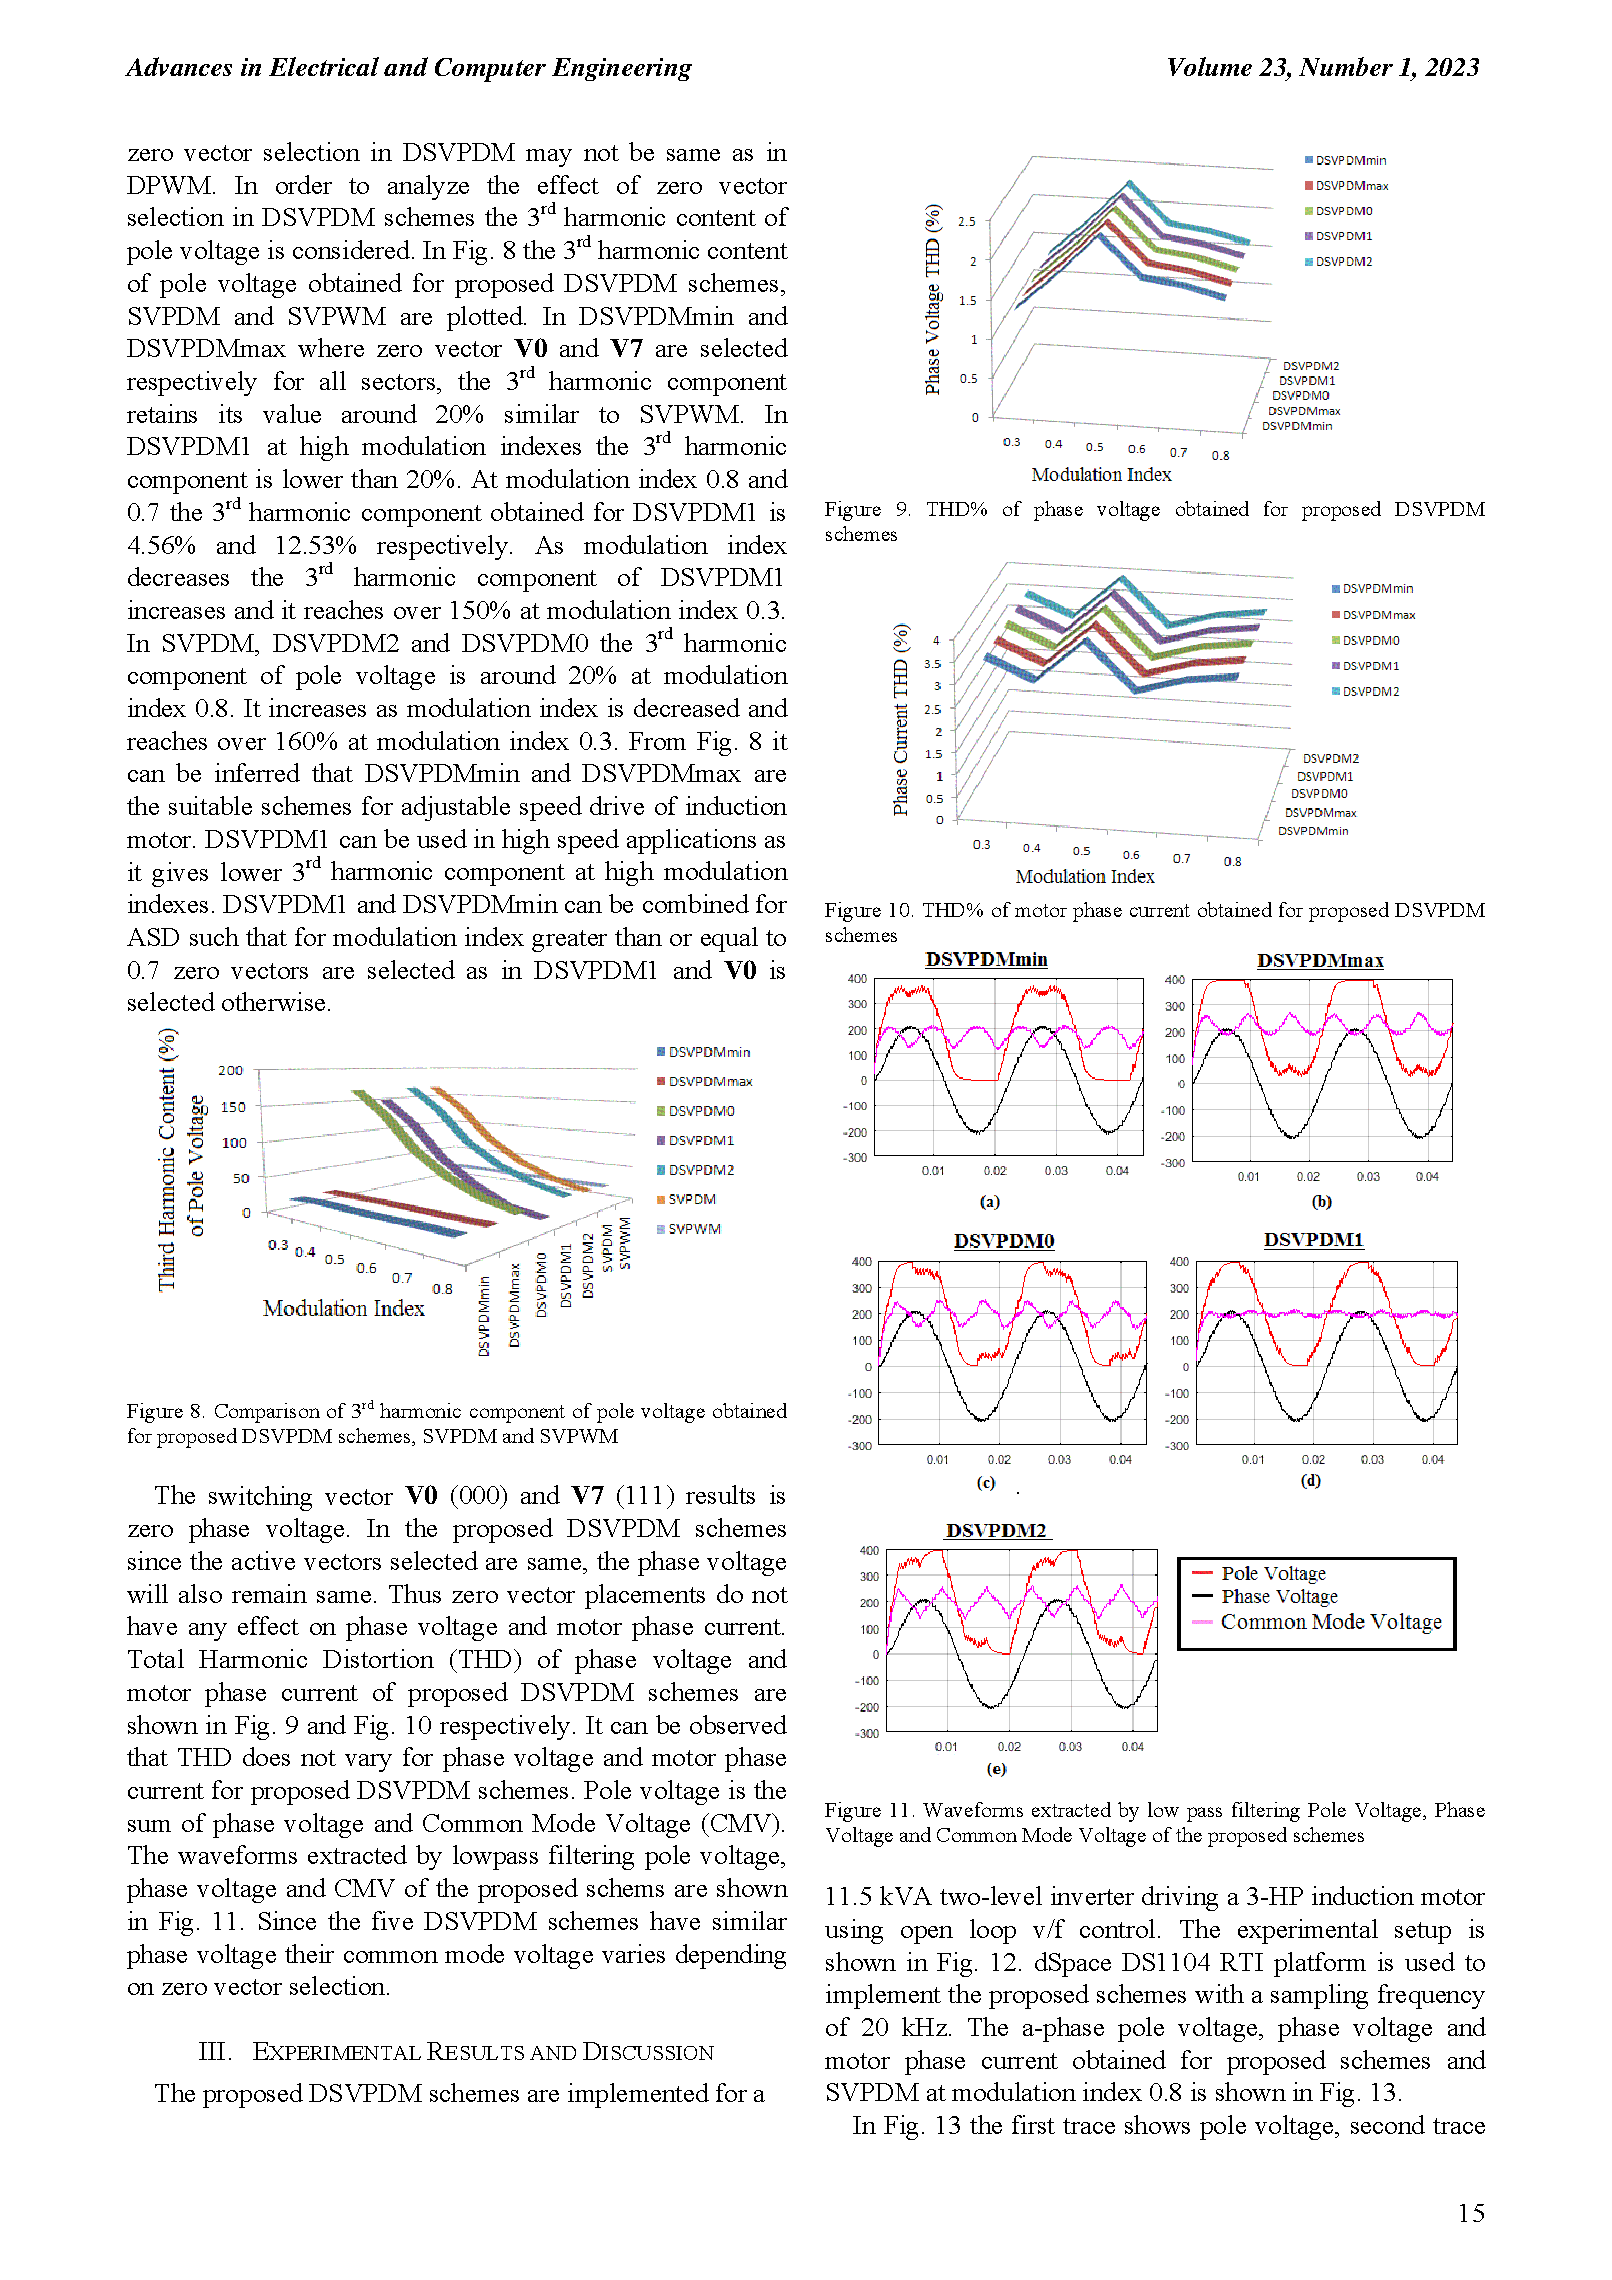 PDF Quickview for paper with DOI:10.4316/AECE.2023.01002